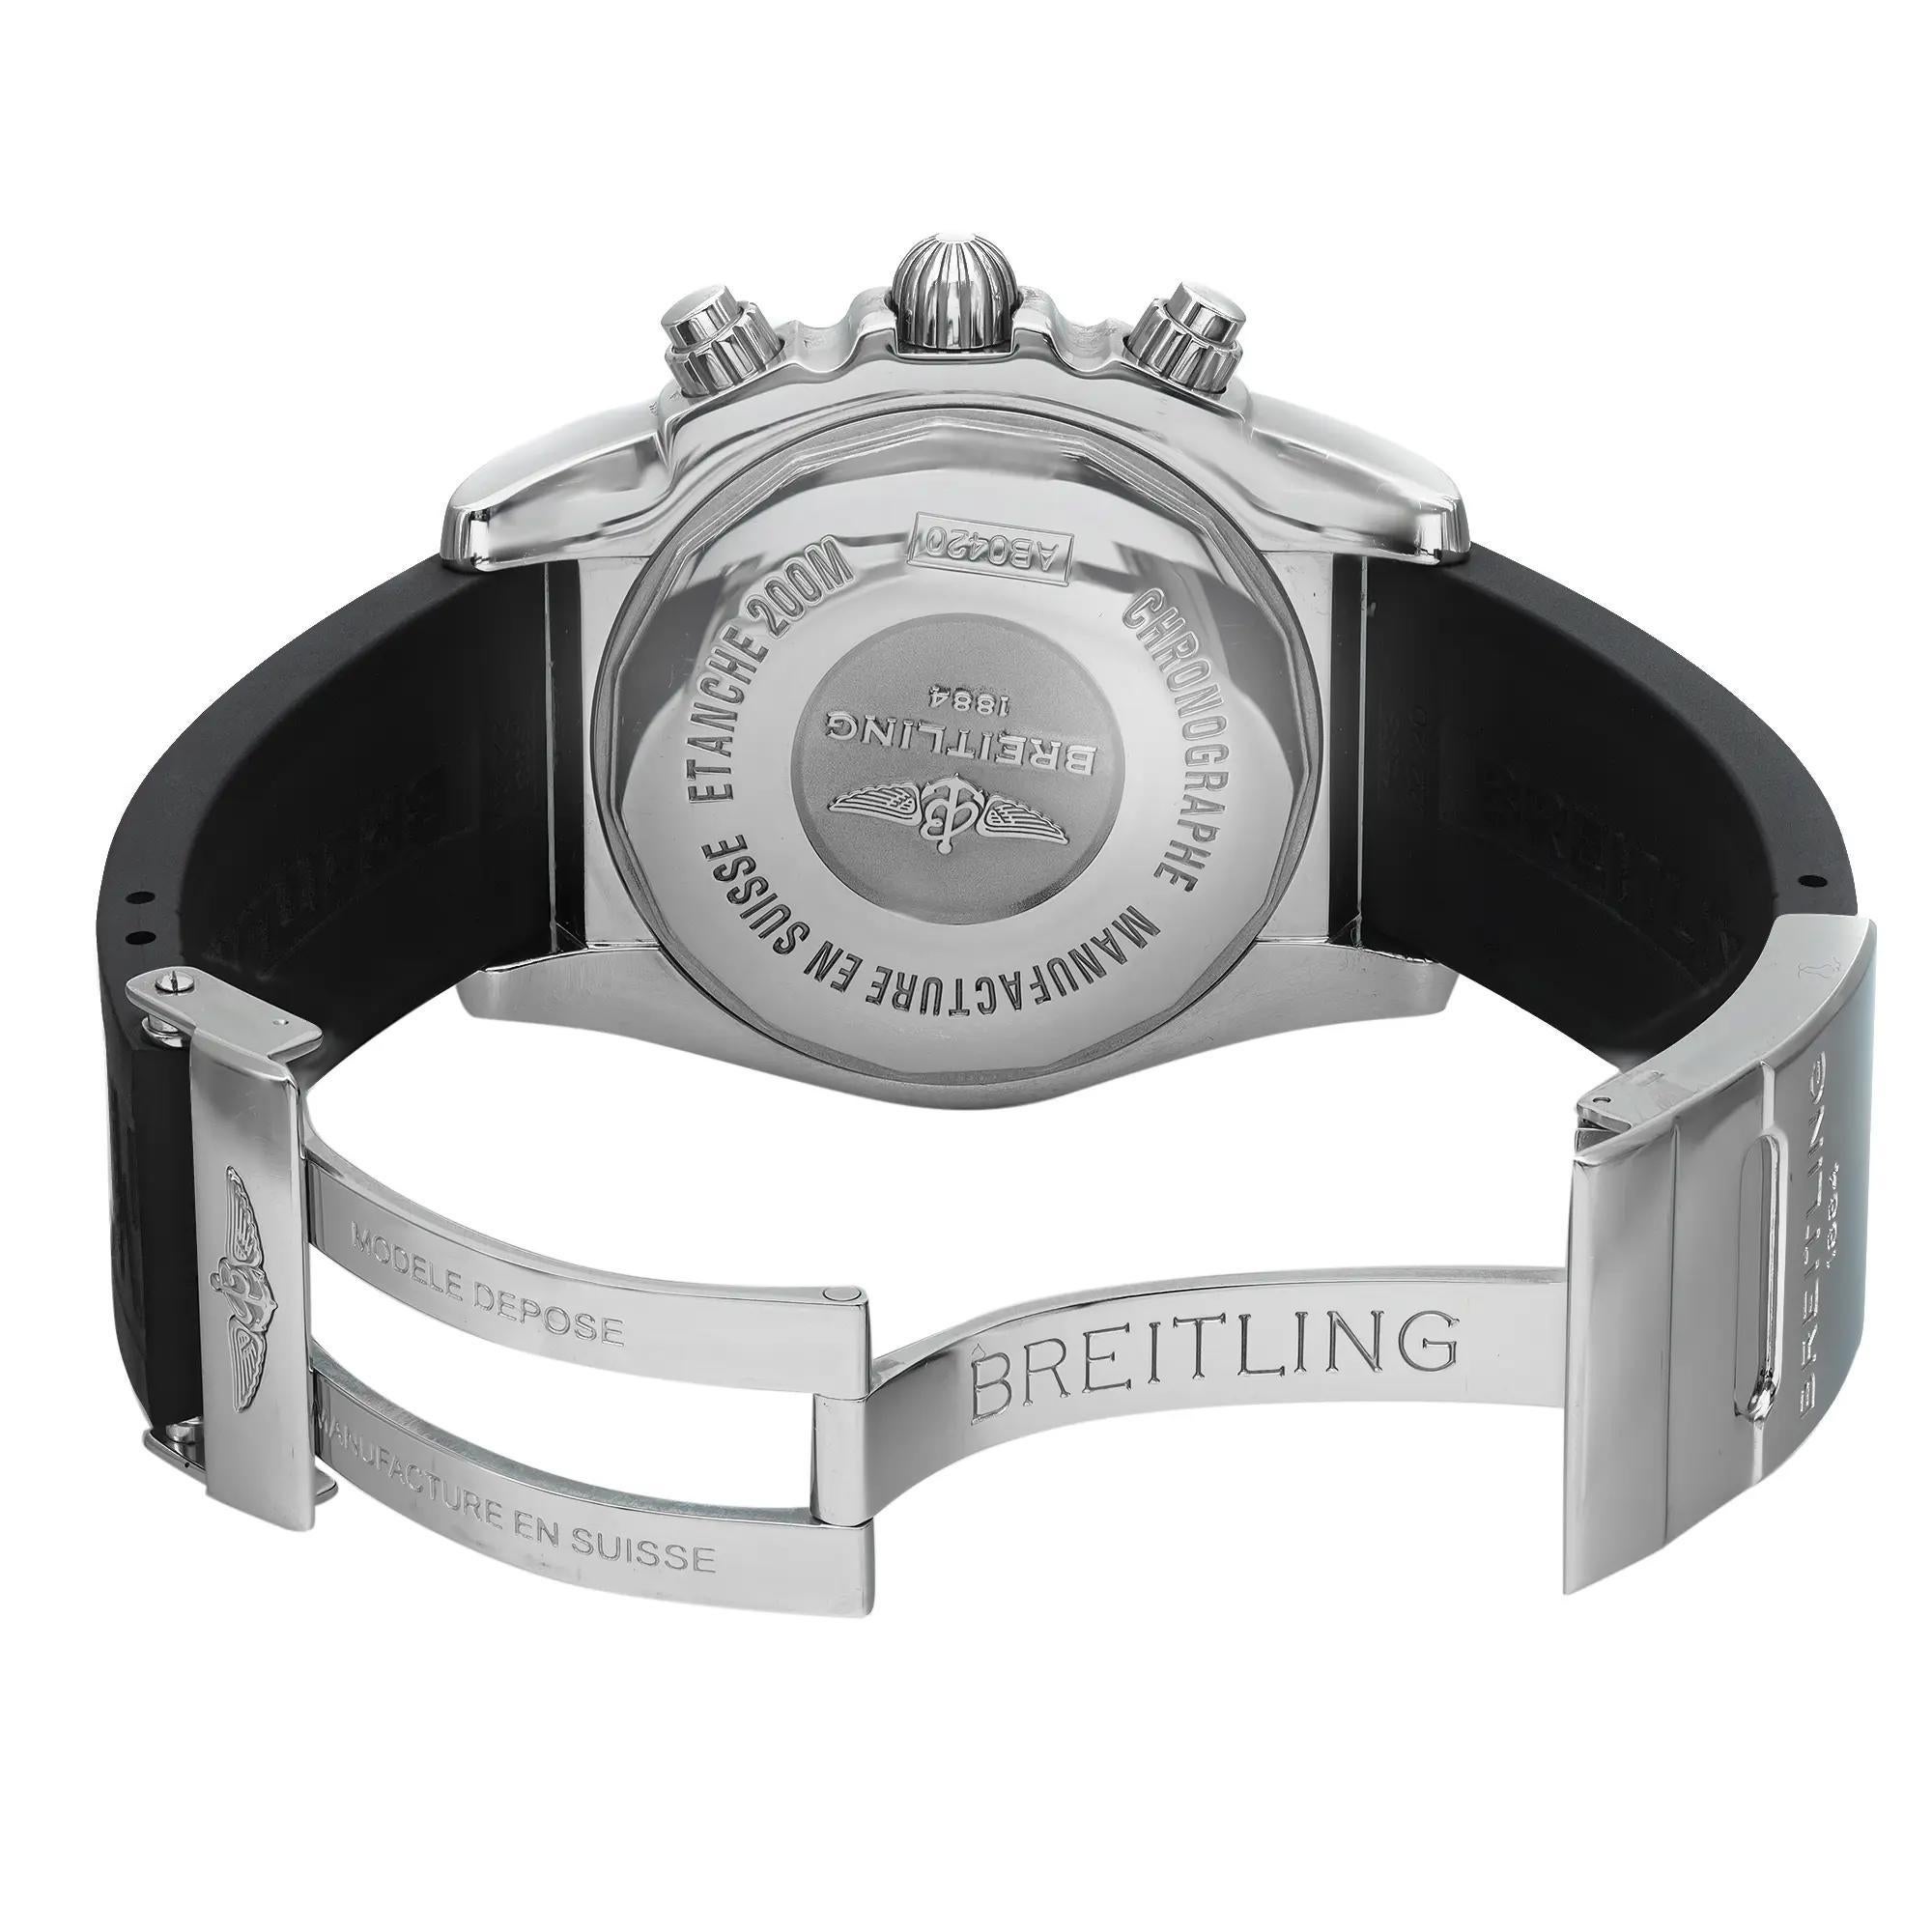 Breitling Chronomat GMT Steel Black Dial Automatic Watch AB042011/BB56-153S In Good Condition For Sale In New York, NY